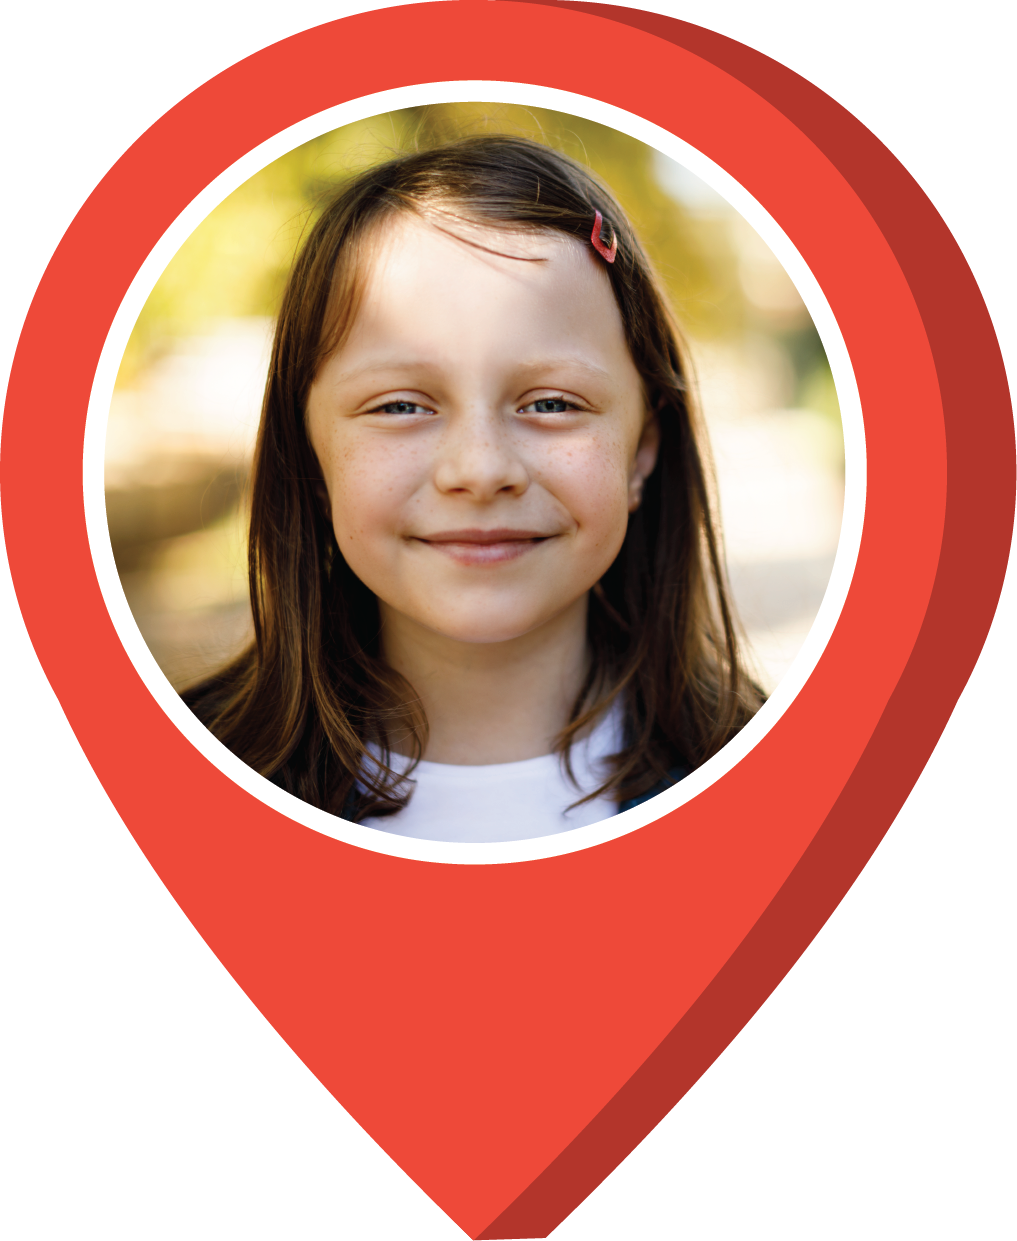 map pin with image of a girl